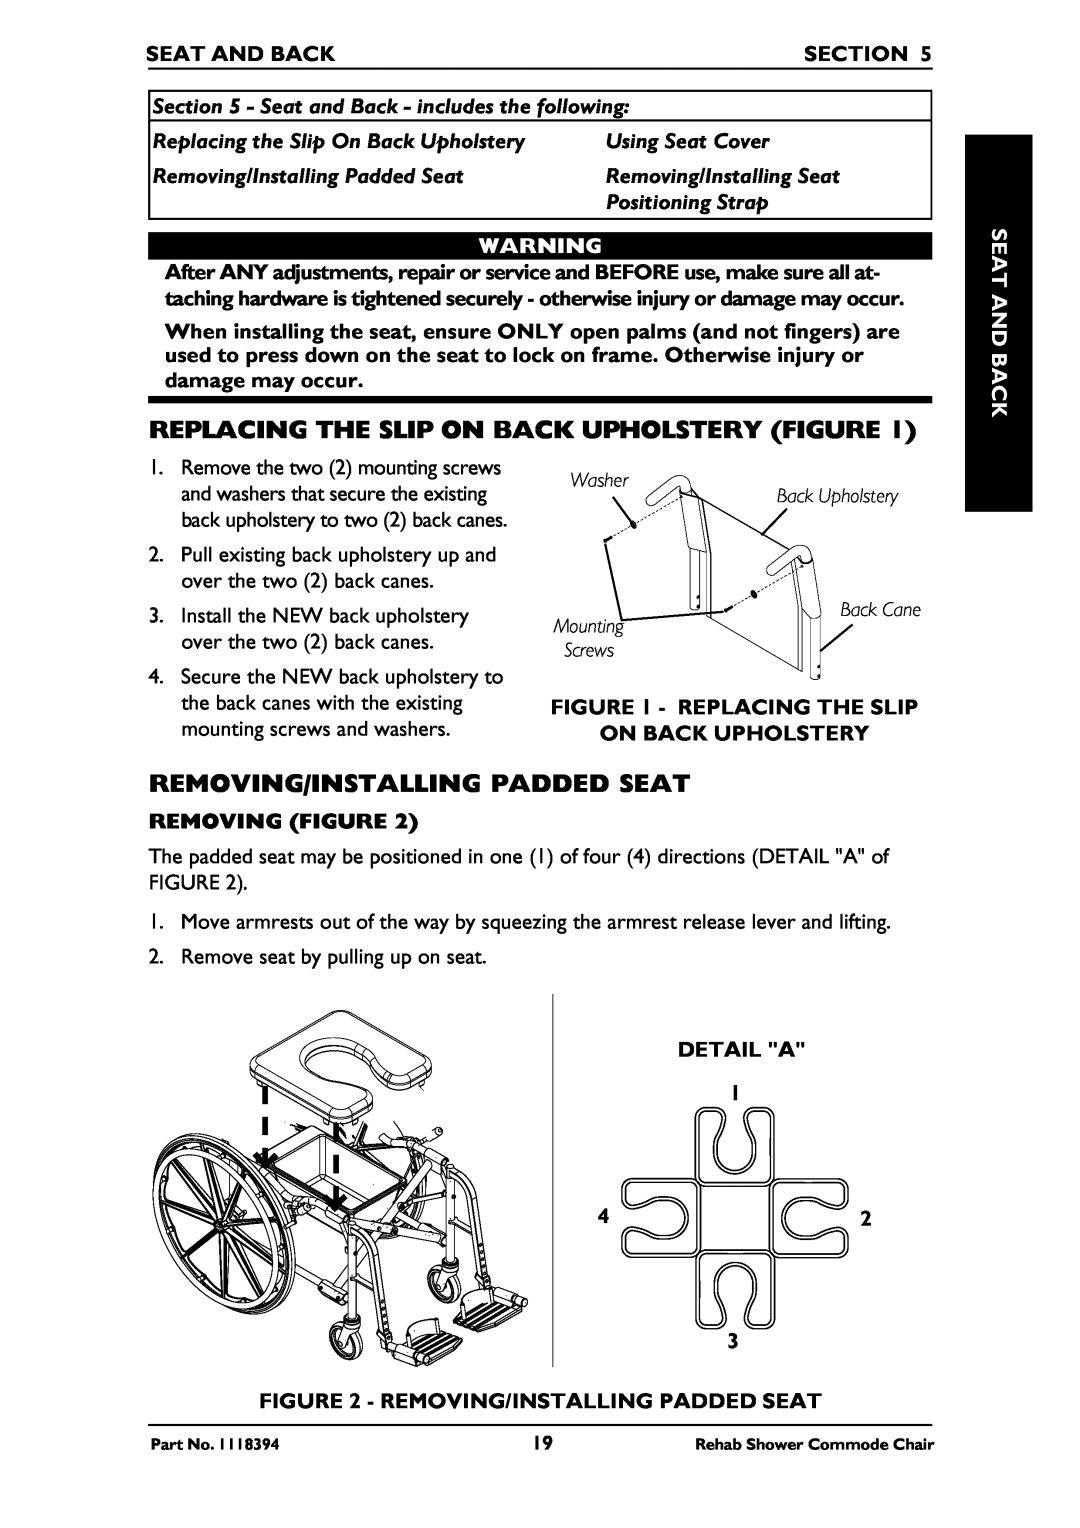 Invacare 6895, 6795 Replacing The Slip On Back Upholstery Figure, Removing/Installing Padded Seat, Seat And Back, Section 